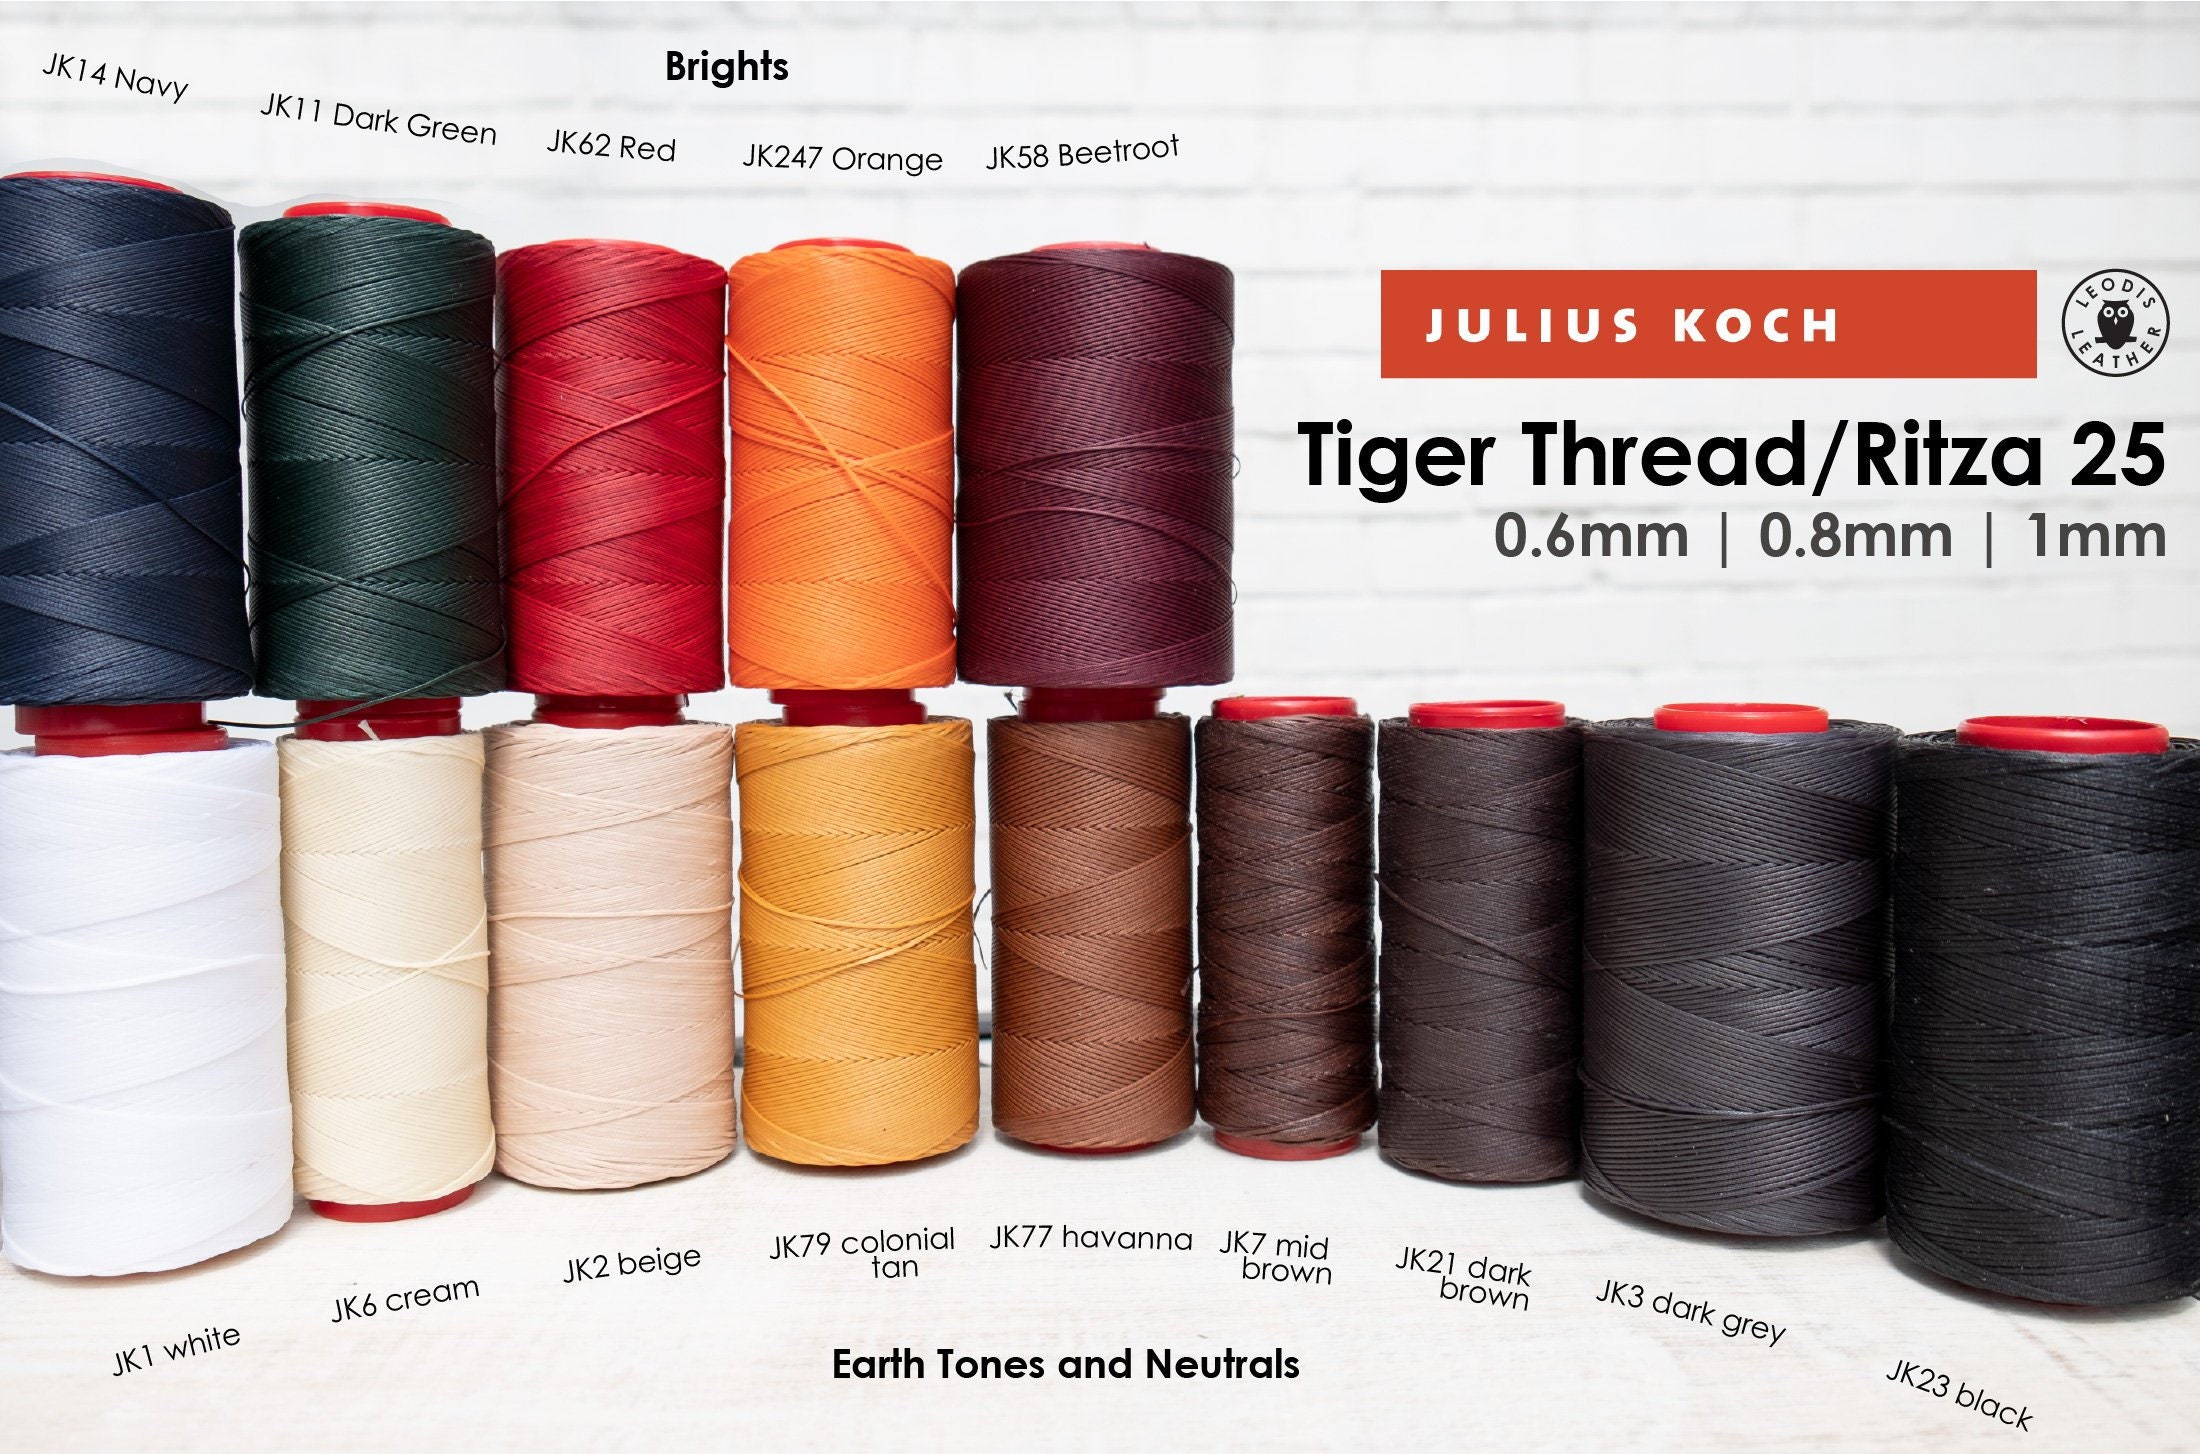 Sample Card - Tiger Thread - Ritza 25 - All Sizes Included